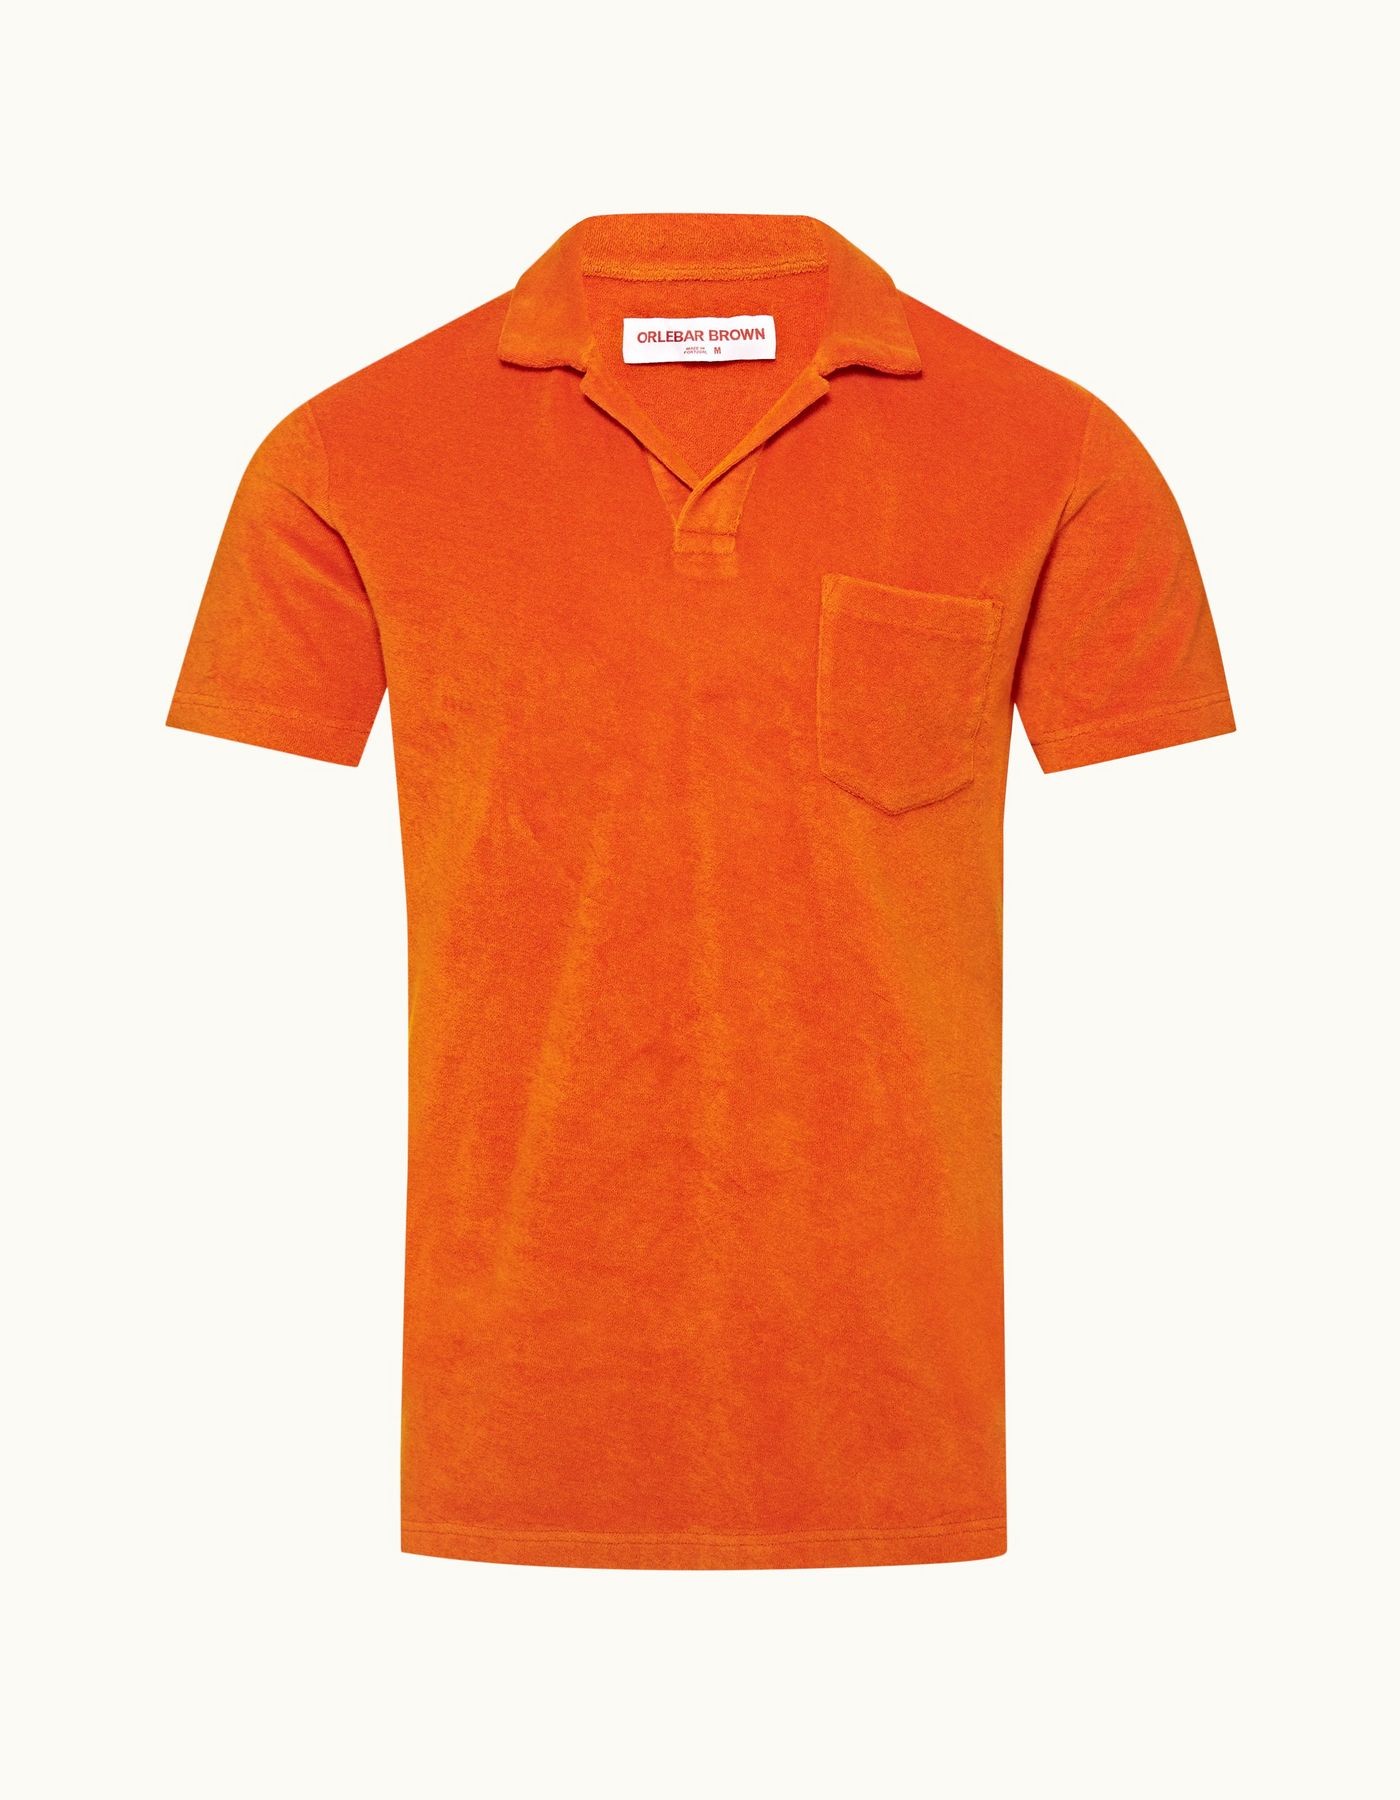 Terry Towelling - Mens Tiger Lily Tailored Fit Organic Cotton Towelling Resort Polo Shirt